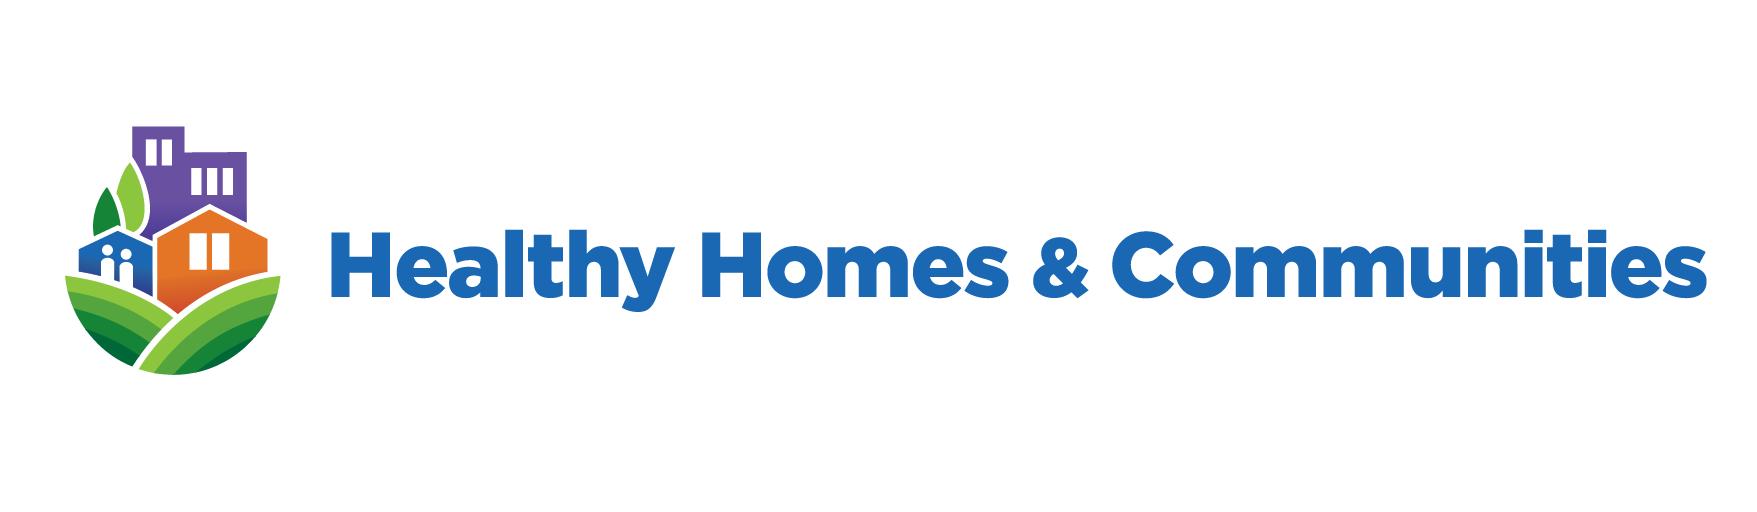 Healthy Homes and Communities logo